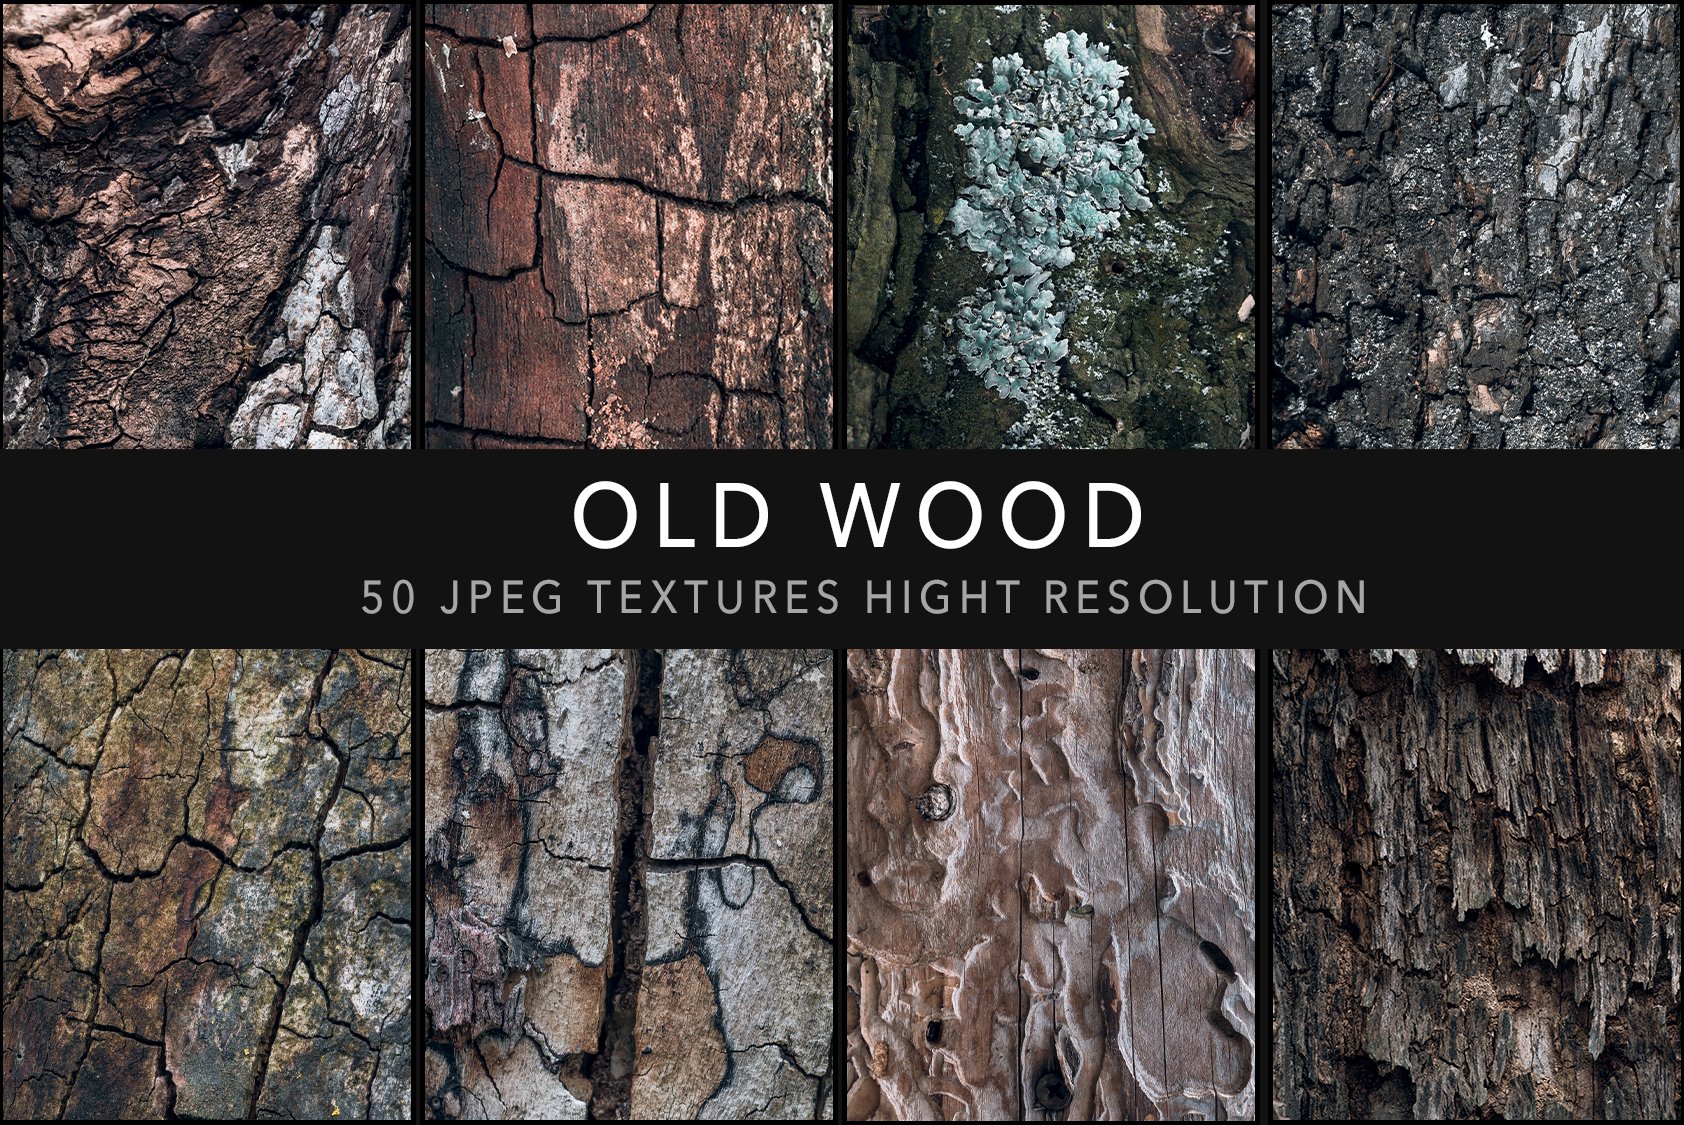 50 Old wood textures cover image.